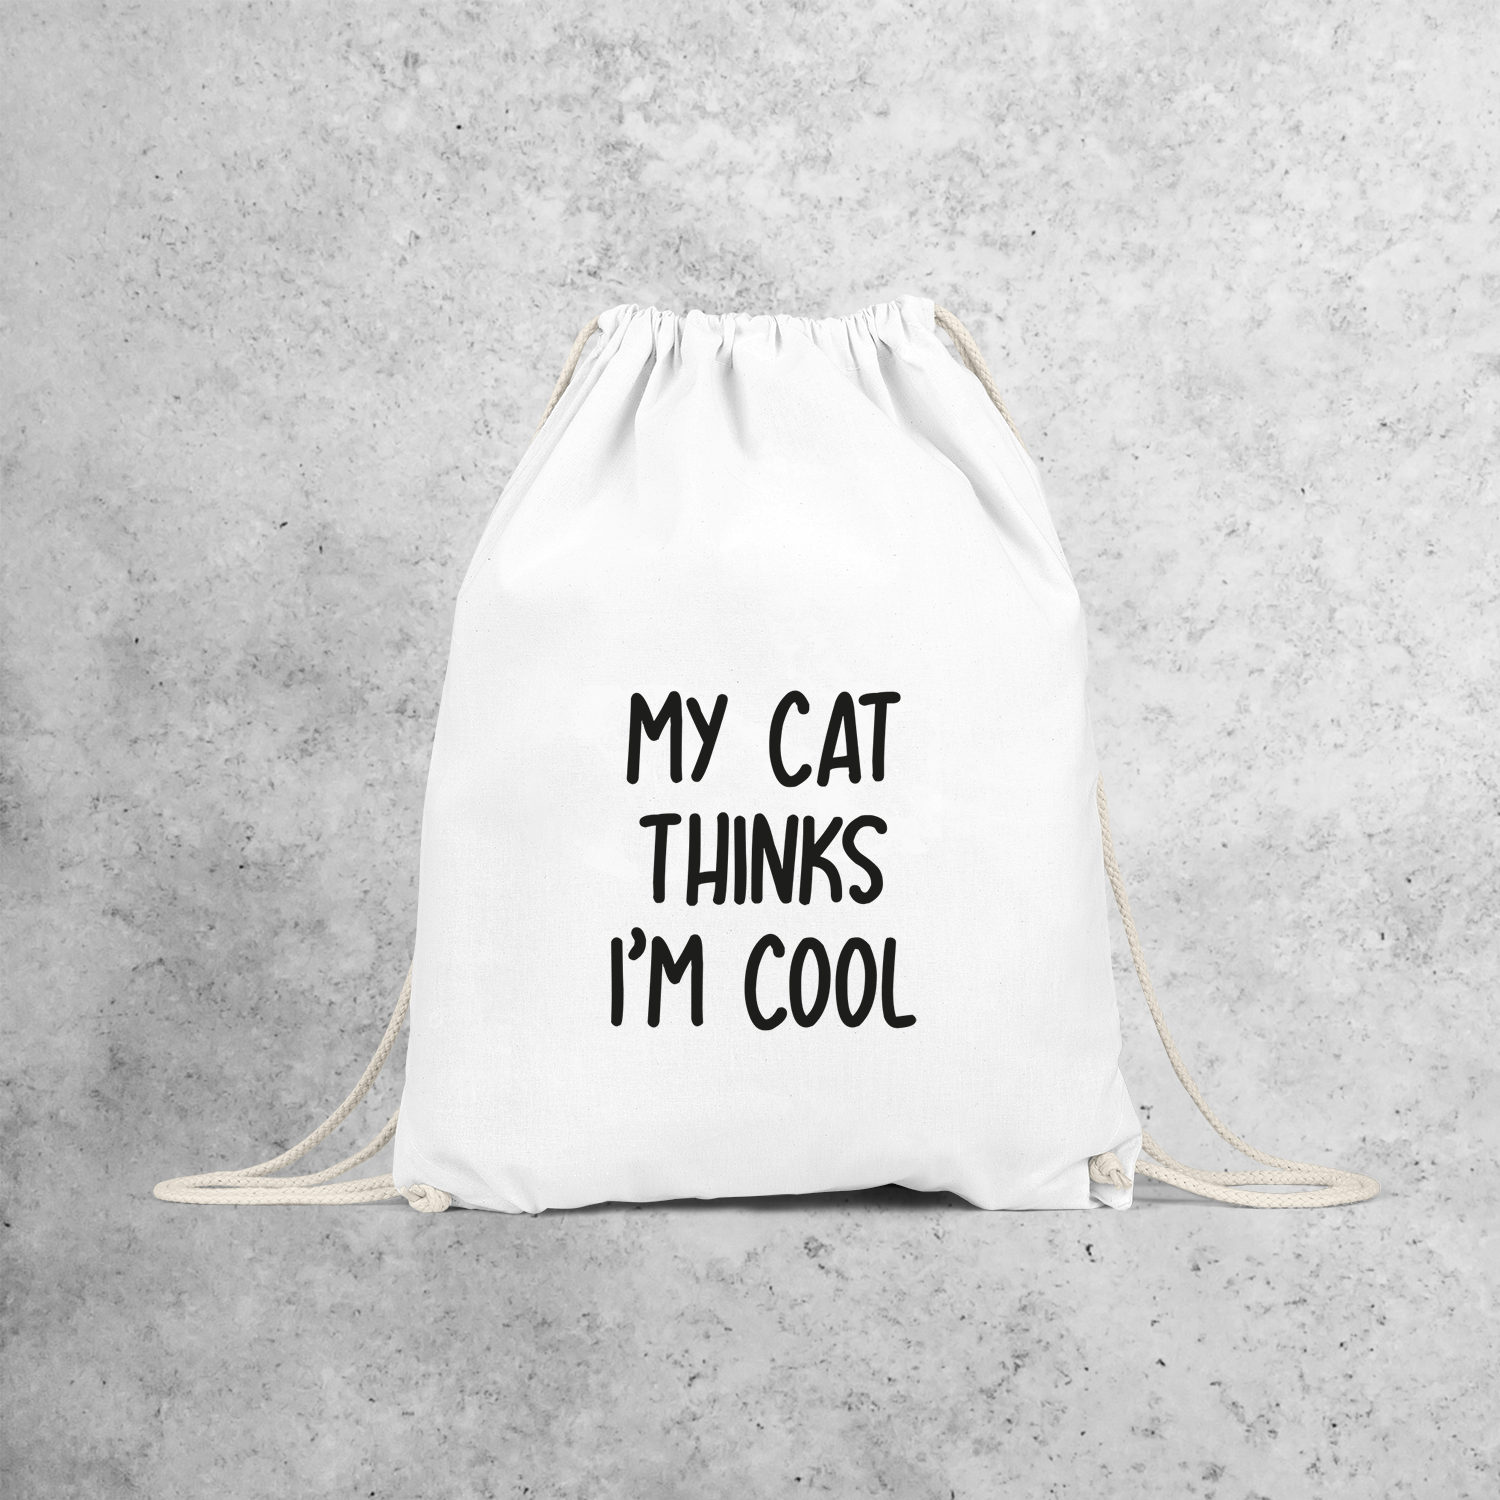 'My cat thinks I'm cool' backpack